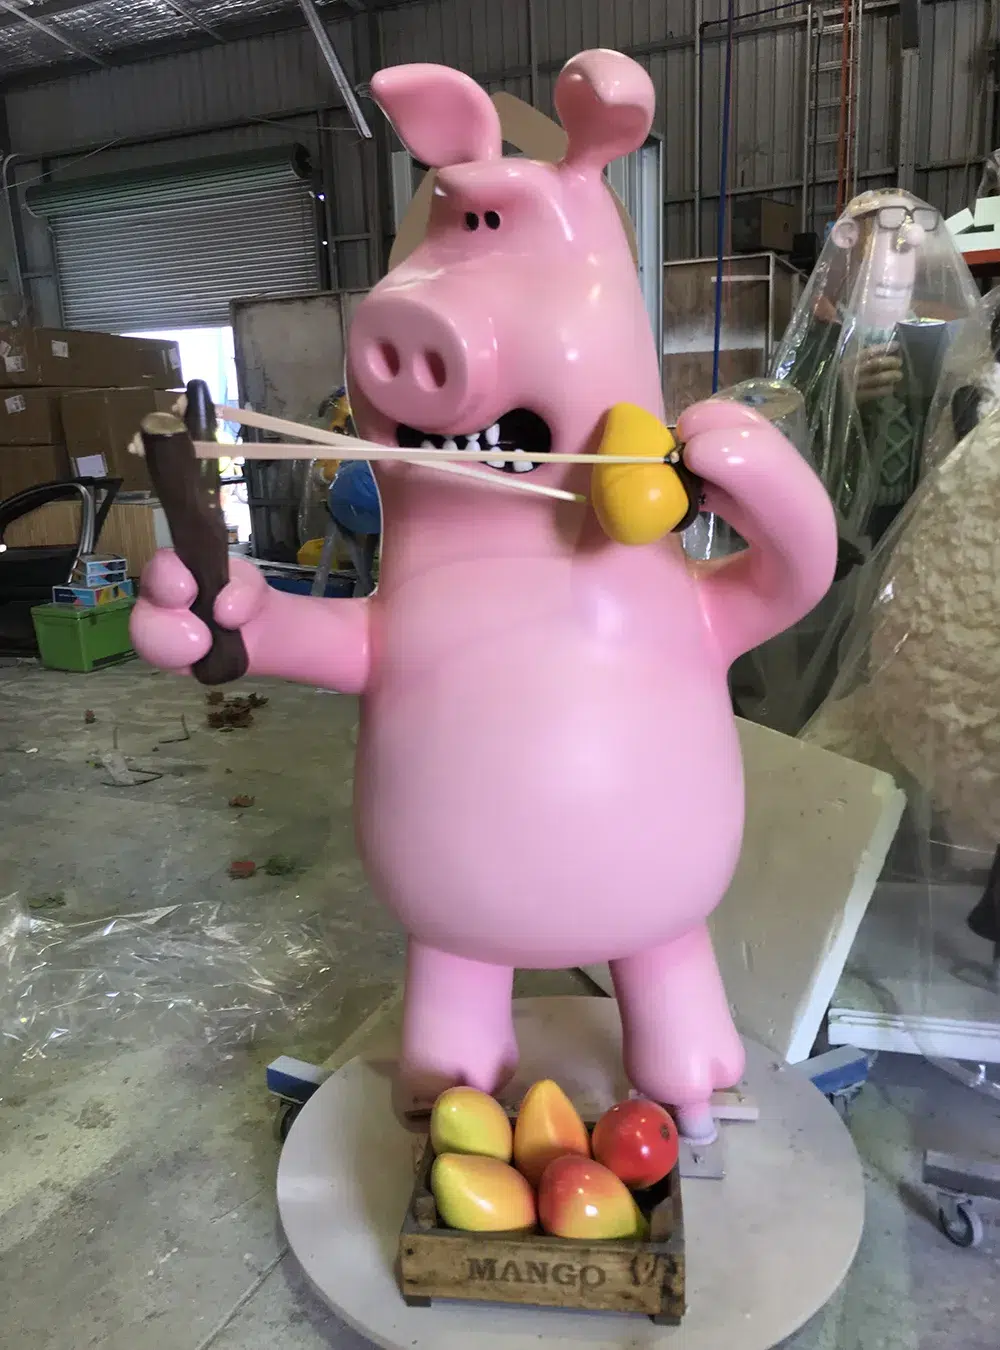 Bright pink animated pig sculpture playfully holding a slingshot and standing near a wooden crate of colorful mangoes in a workshop setting.